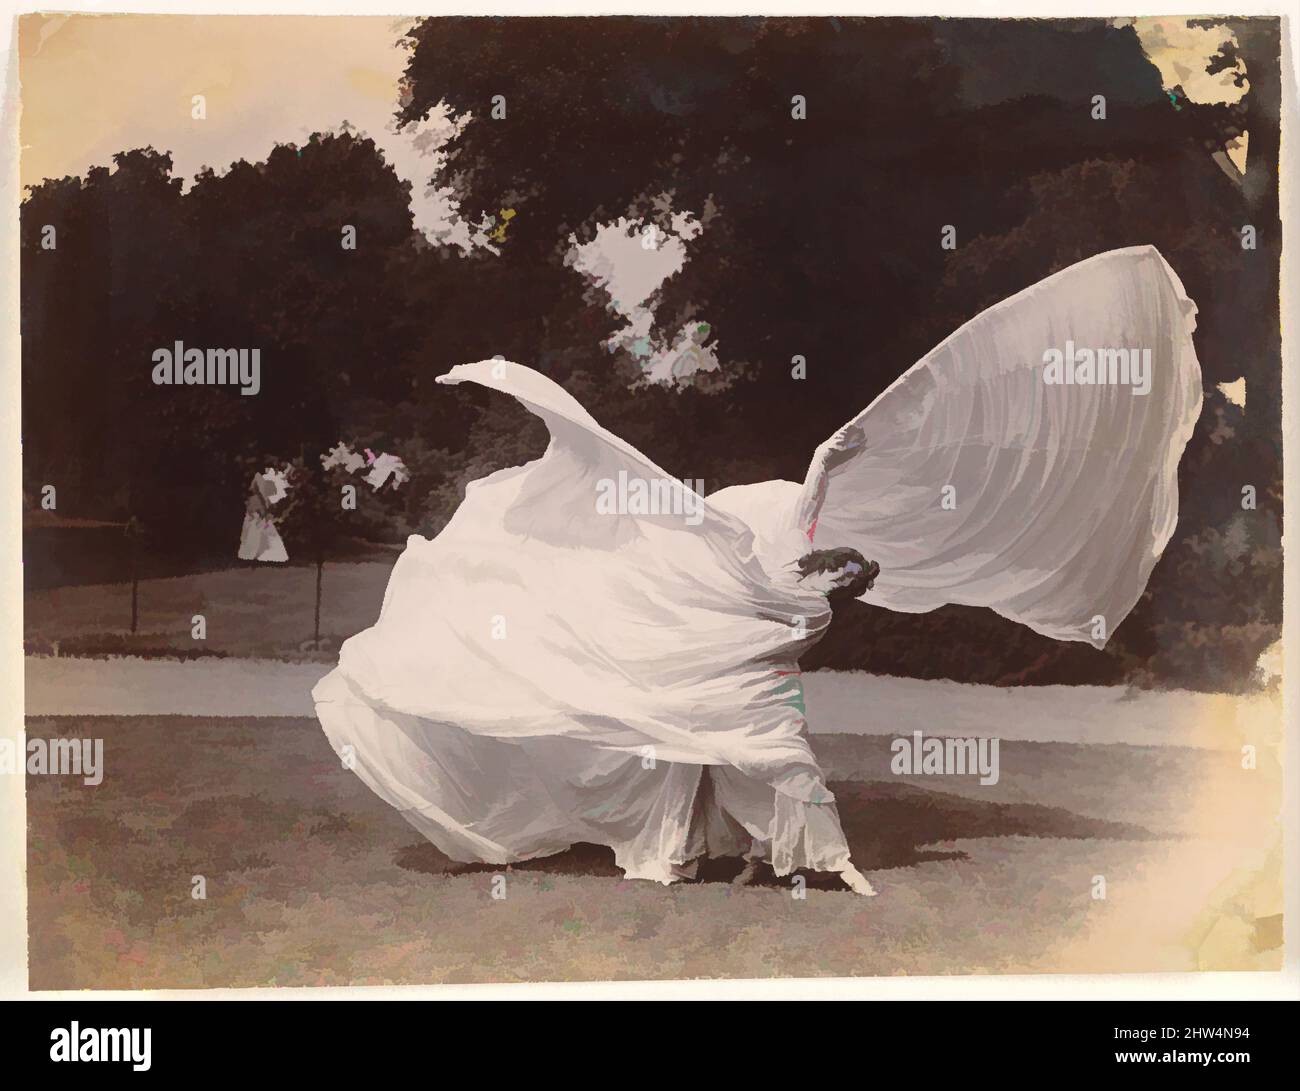 Art inspired by Loie Fuller Dancing, ca. 1900, Gelatin silver print, 10.3 x 13.3 cm (4 x 5 1/4 in.), irregularly trimmed, Photographs, Samuel Joshua Beckett (British, Shadwell, Stepney London 1870–1940 Bournemouth), The American dancer Loie Fuller (1862-1928) conquered Paris on her, Classic works modernized by Artotop with a splash of modernity. Shapes, color and value, eye-catching visual impact on art. Emotions through freedom of artworks in a contemporary way. A timeless message pursuing a wildly creative new direction. Artists turning to the digital medium and creating the Artotop NFT Stock Photo